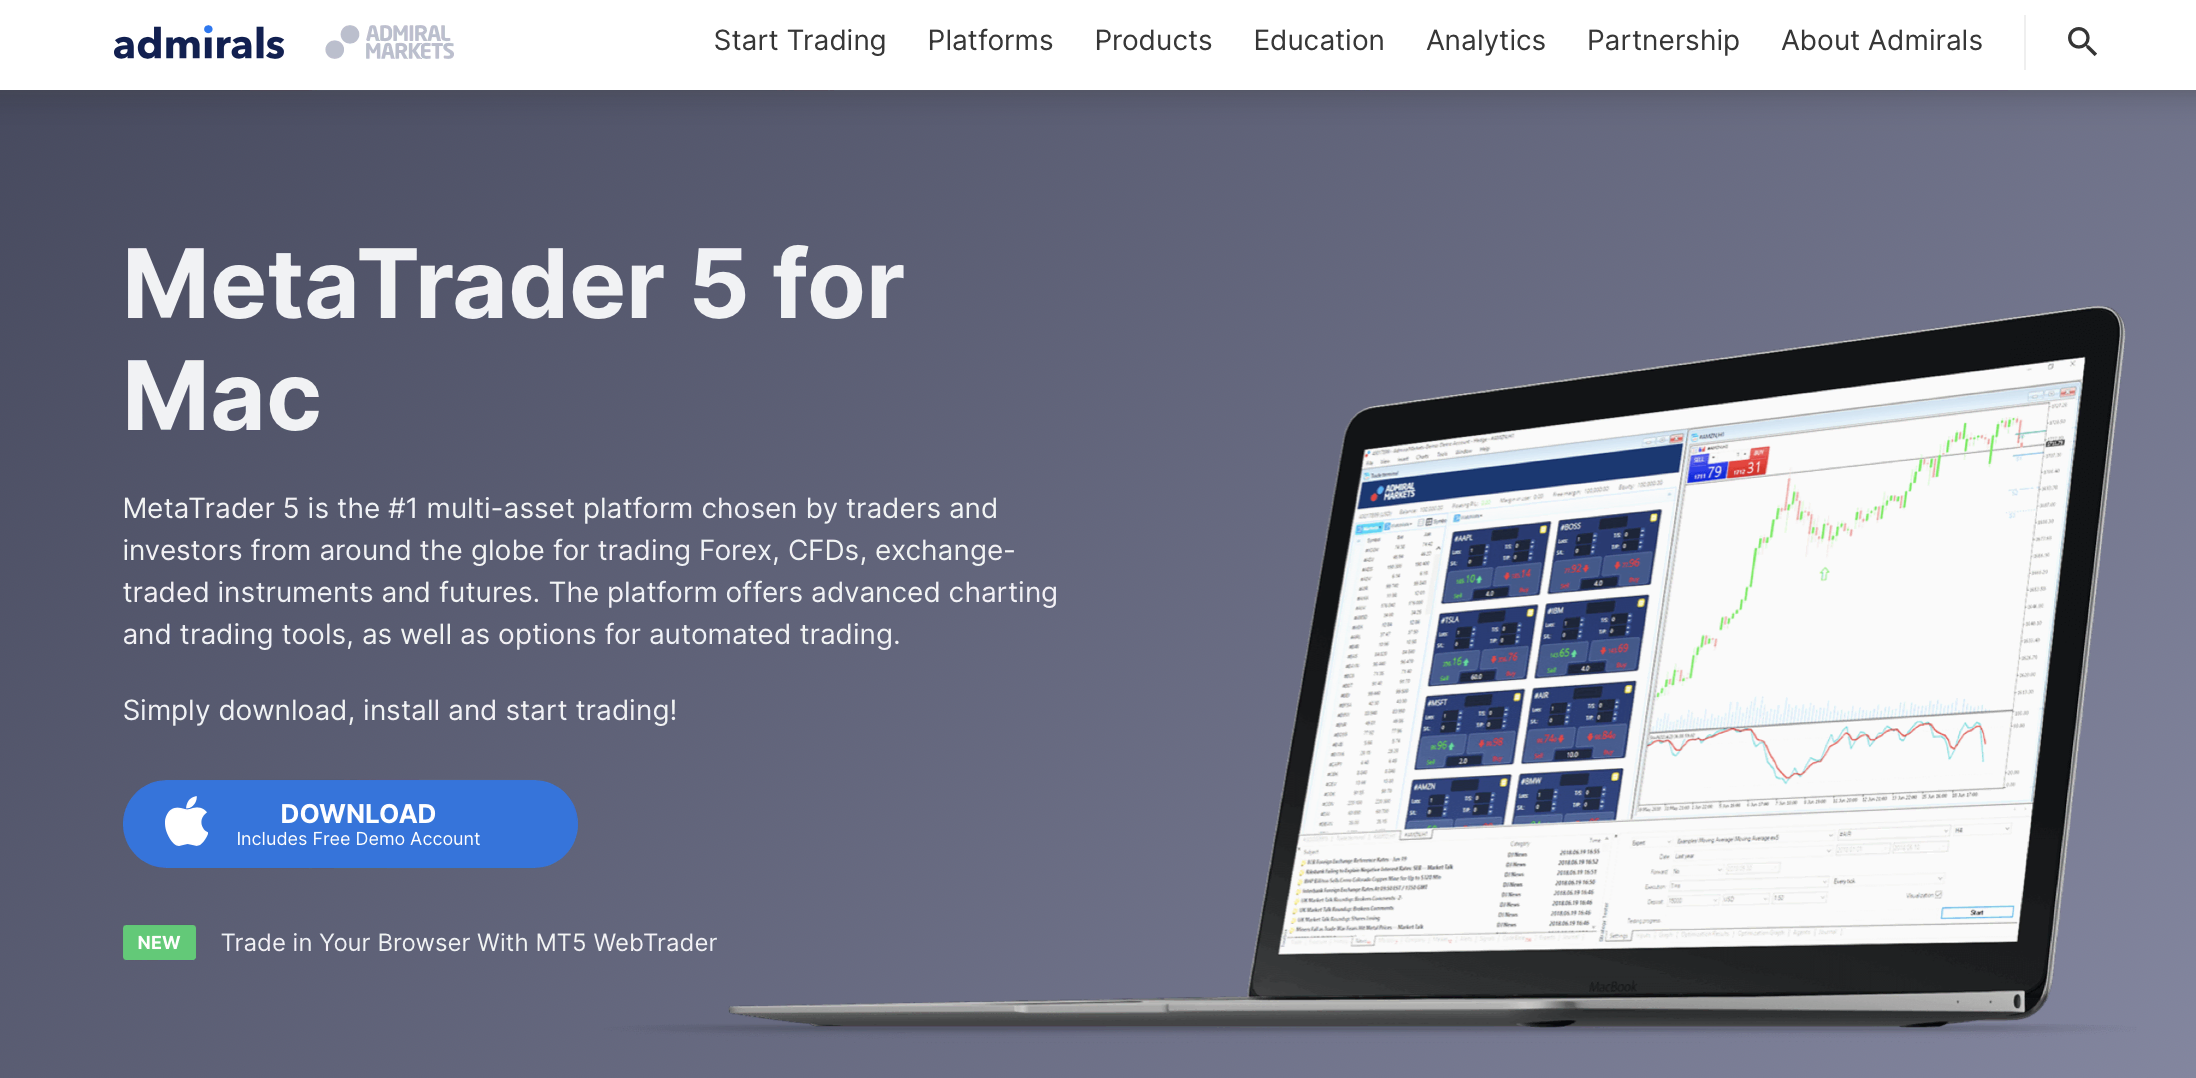 The official landingpage of the admirals MetaTrader 5